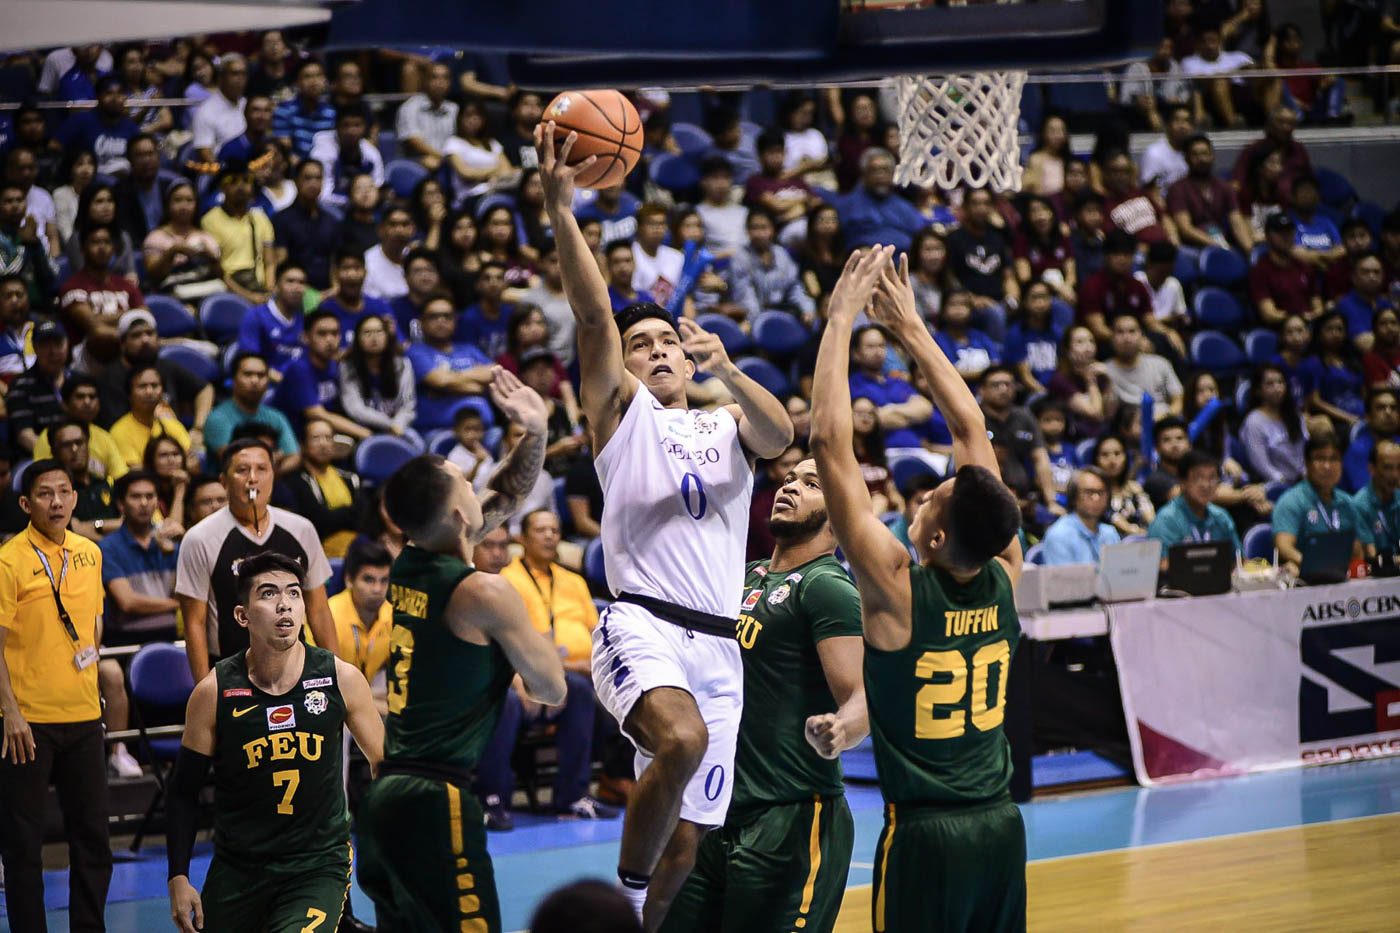 UAAP Weekly wRap: Led by Ravena, Ateneo stands tall once again